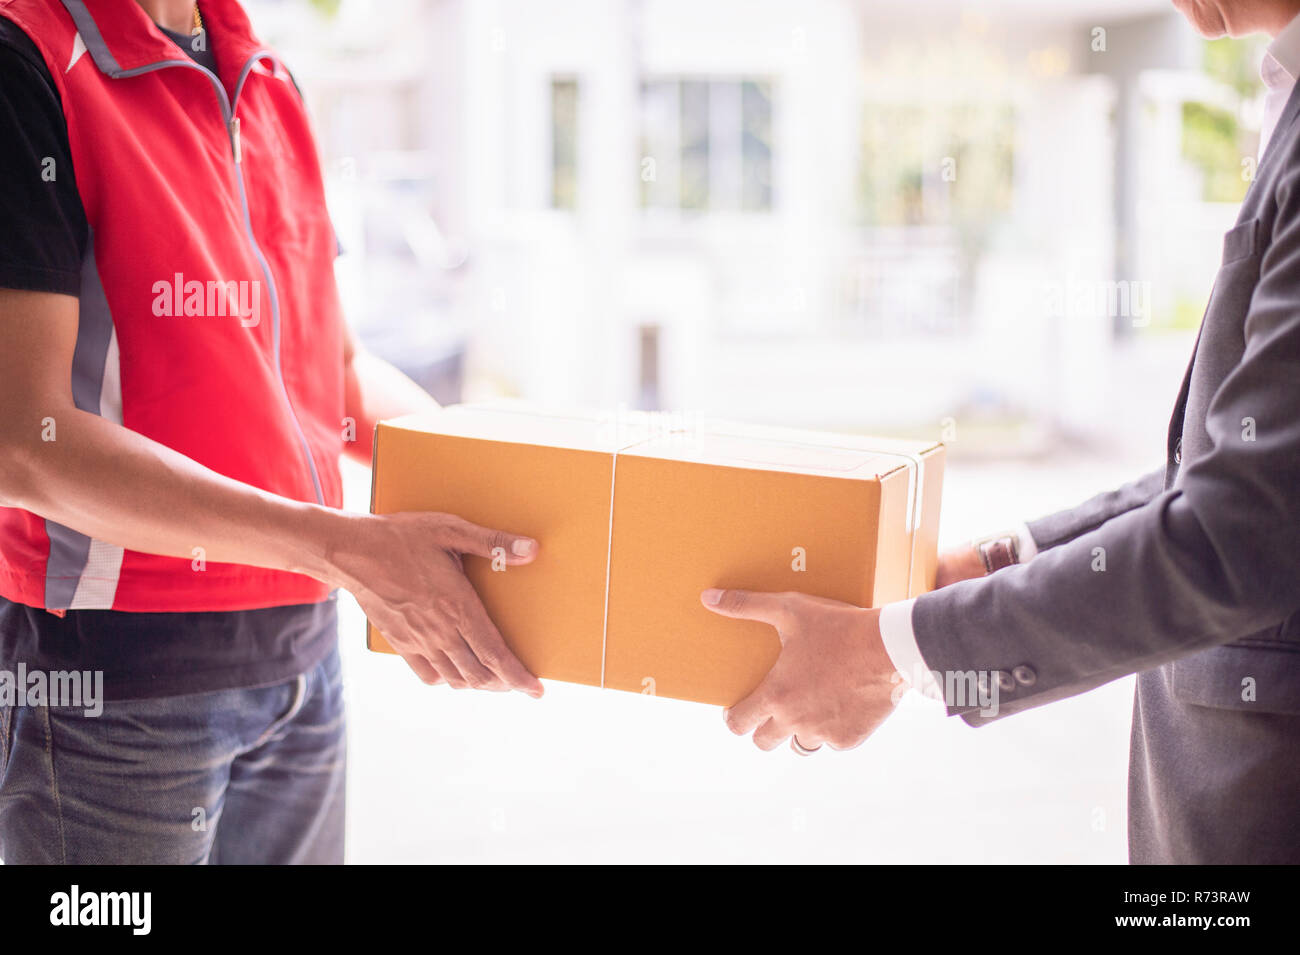 Deliveryman holding the box. A closeup of delivery service staff handing the parcel to man customer at door. Business and logistic concept. Stock Photo